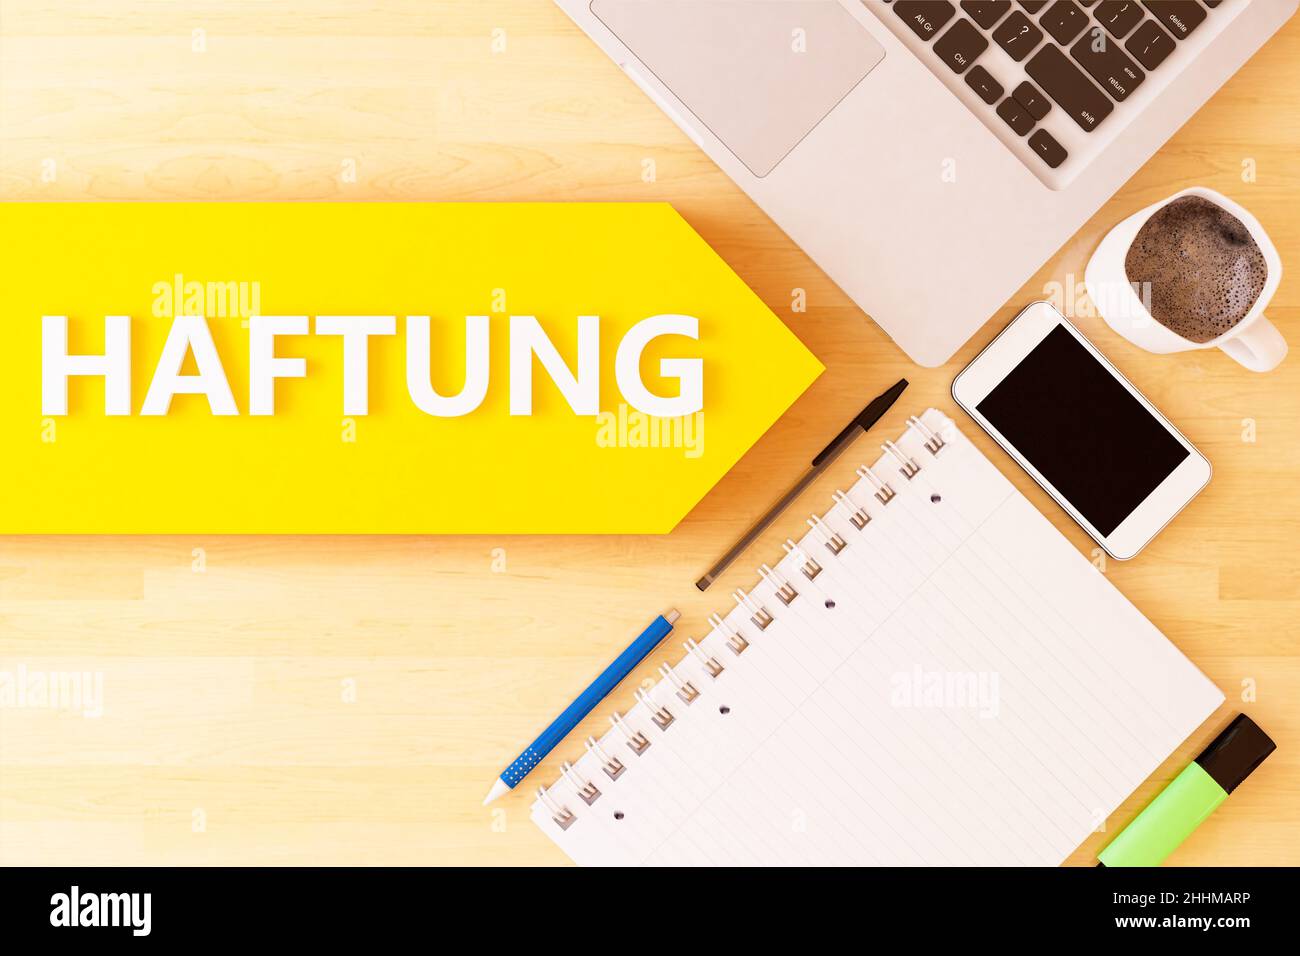 Haftung - german word for liability - linear text arrow concept with notebook, smartphone, pens and coffee mug on desktop - 3D render illustration. Stock Photo